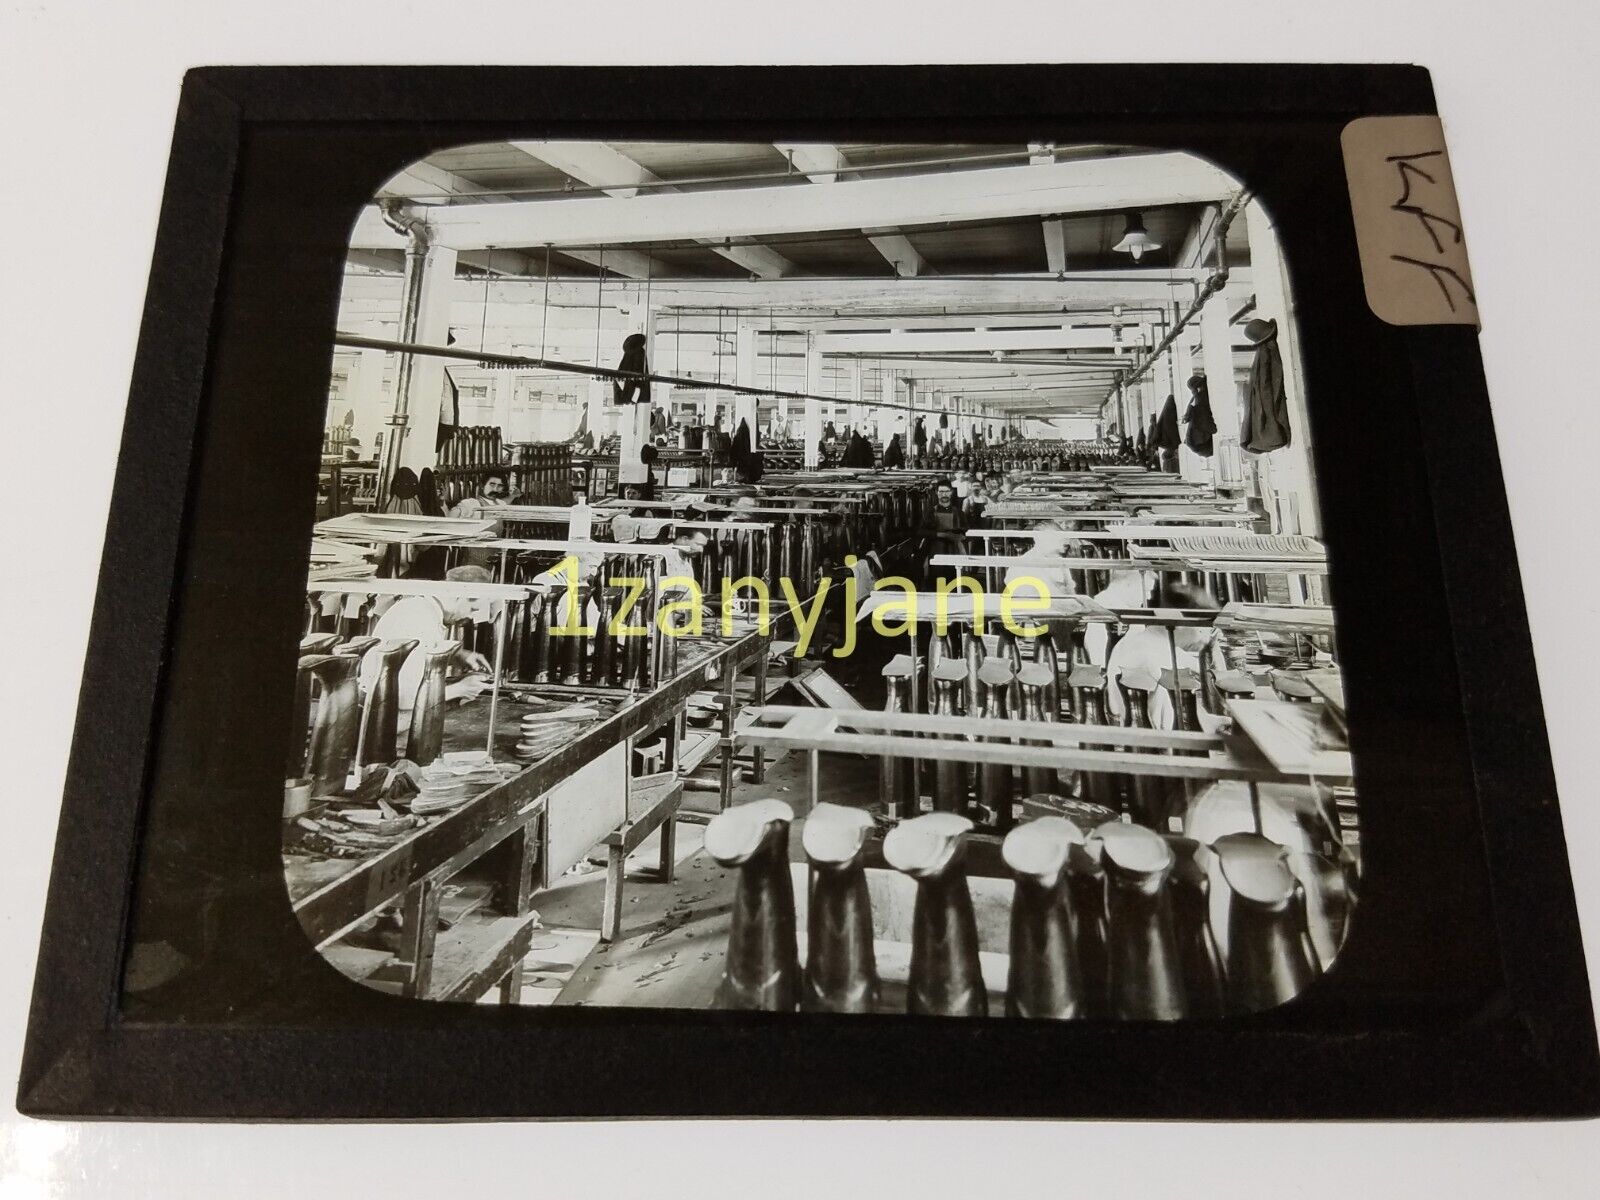 KFF HISTORIC Magic Lantern GLASS Slide SHOE FACTORY MANY WORKBENCHES AND BOOTS